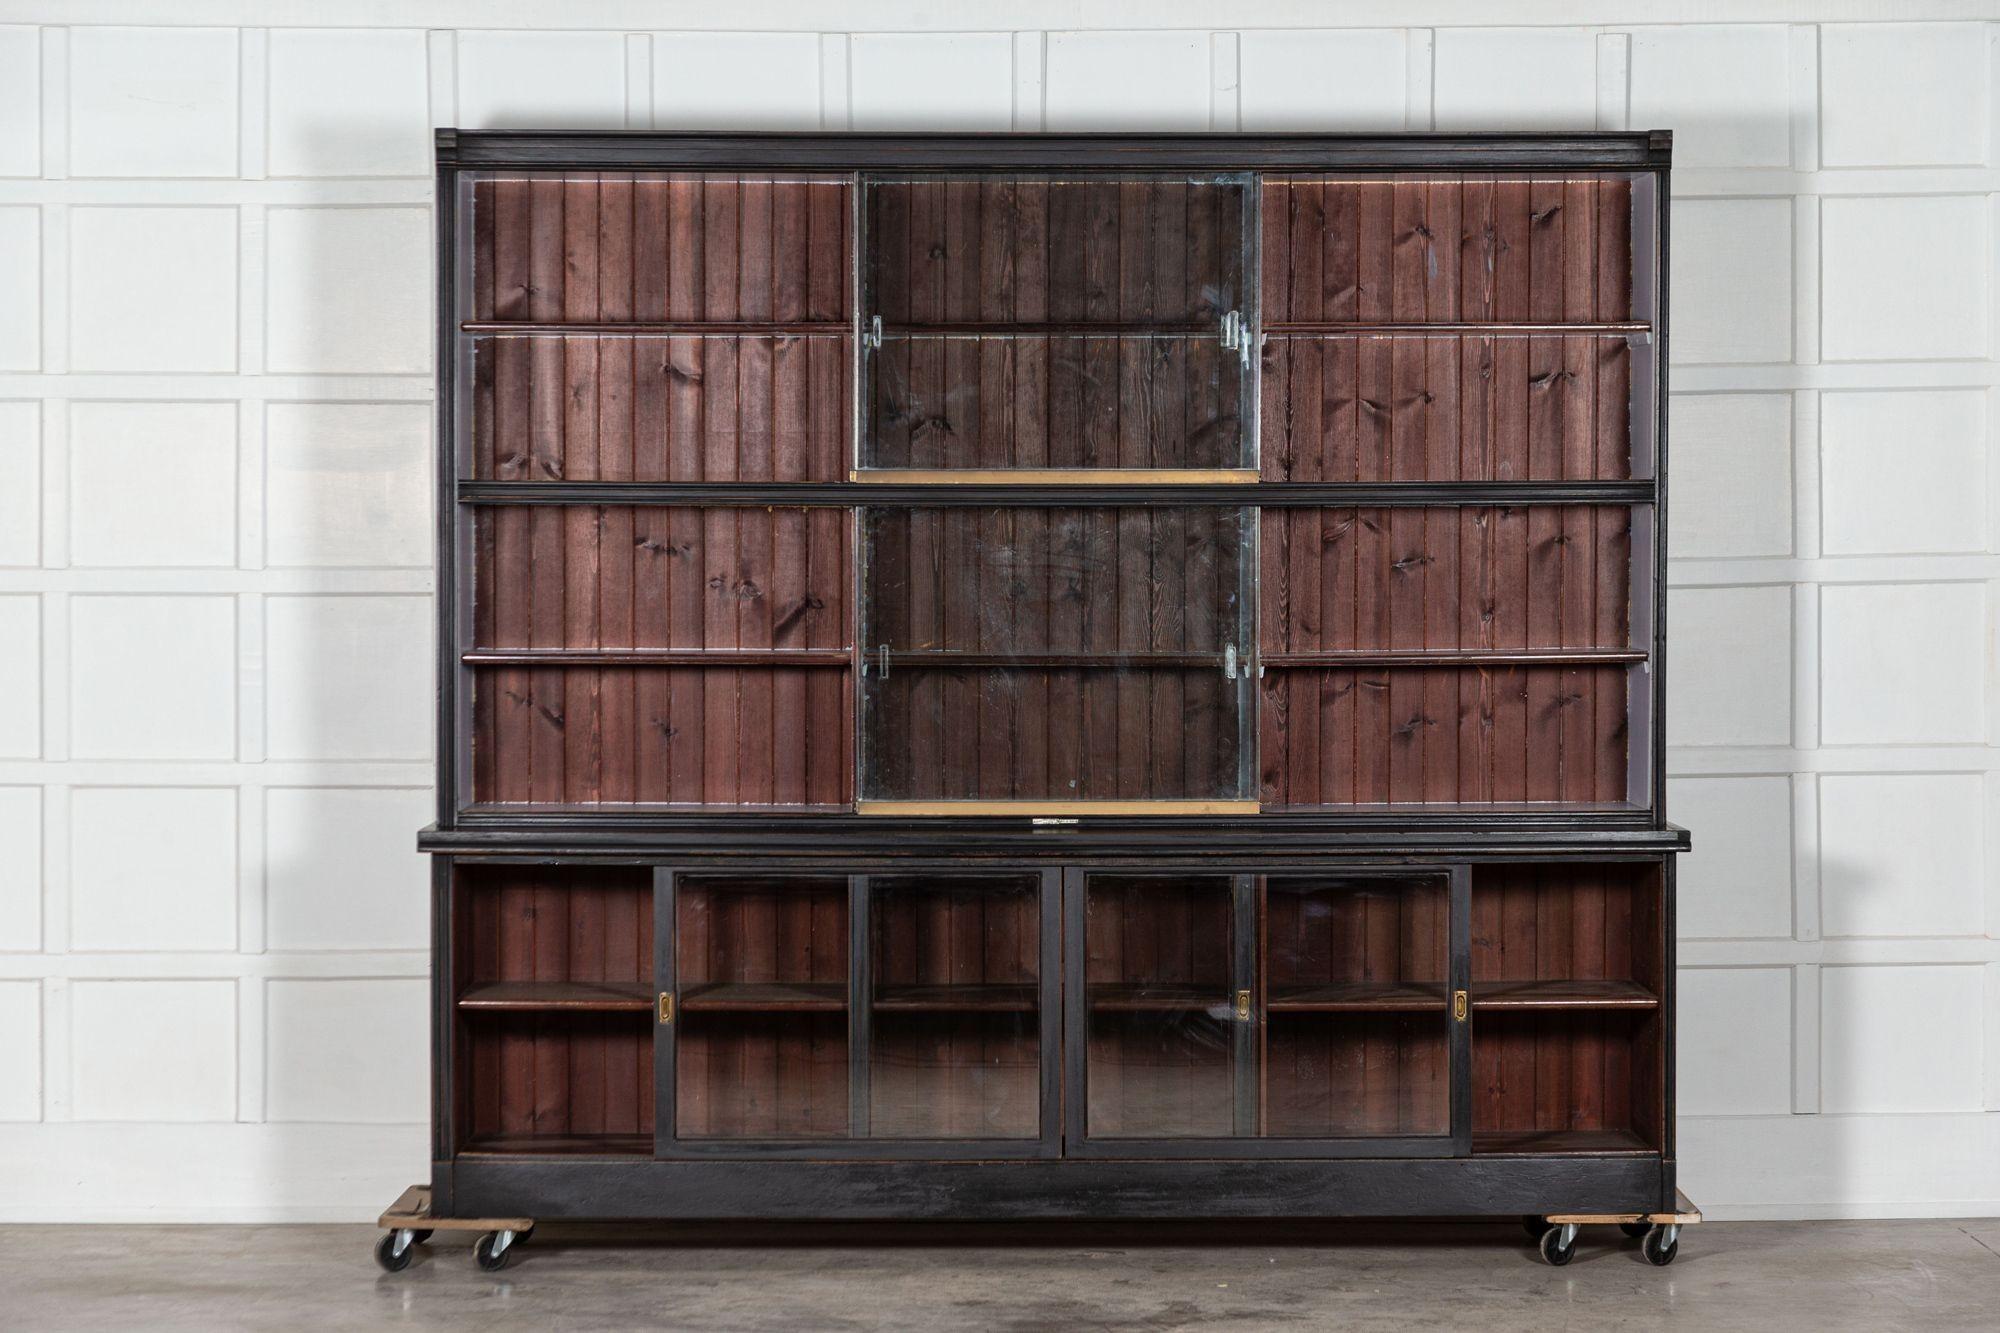 circa 1900
Monumental ebonized glazed mahogany & pine haberdashery cabinet with 9 glazed sliding doors
We can also customise existing pieces to suit your scheme/requirements. We have our own workshop, restorers and finishers. From adapting to